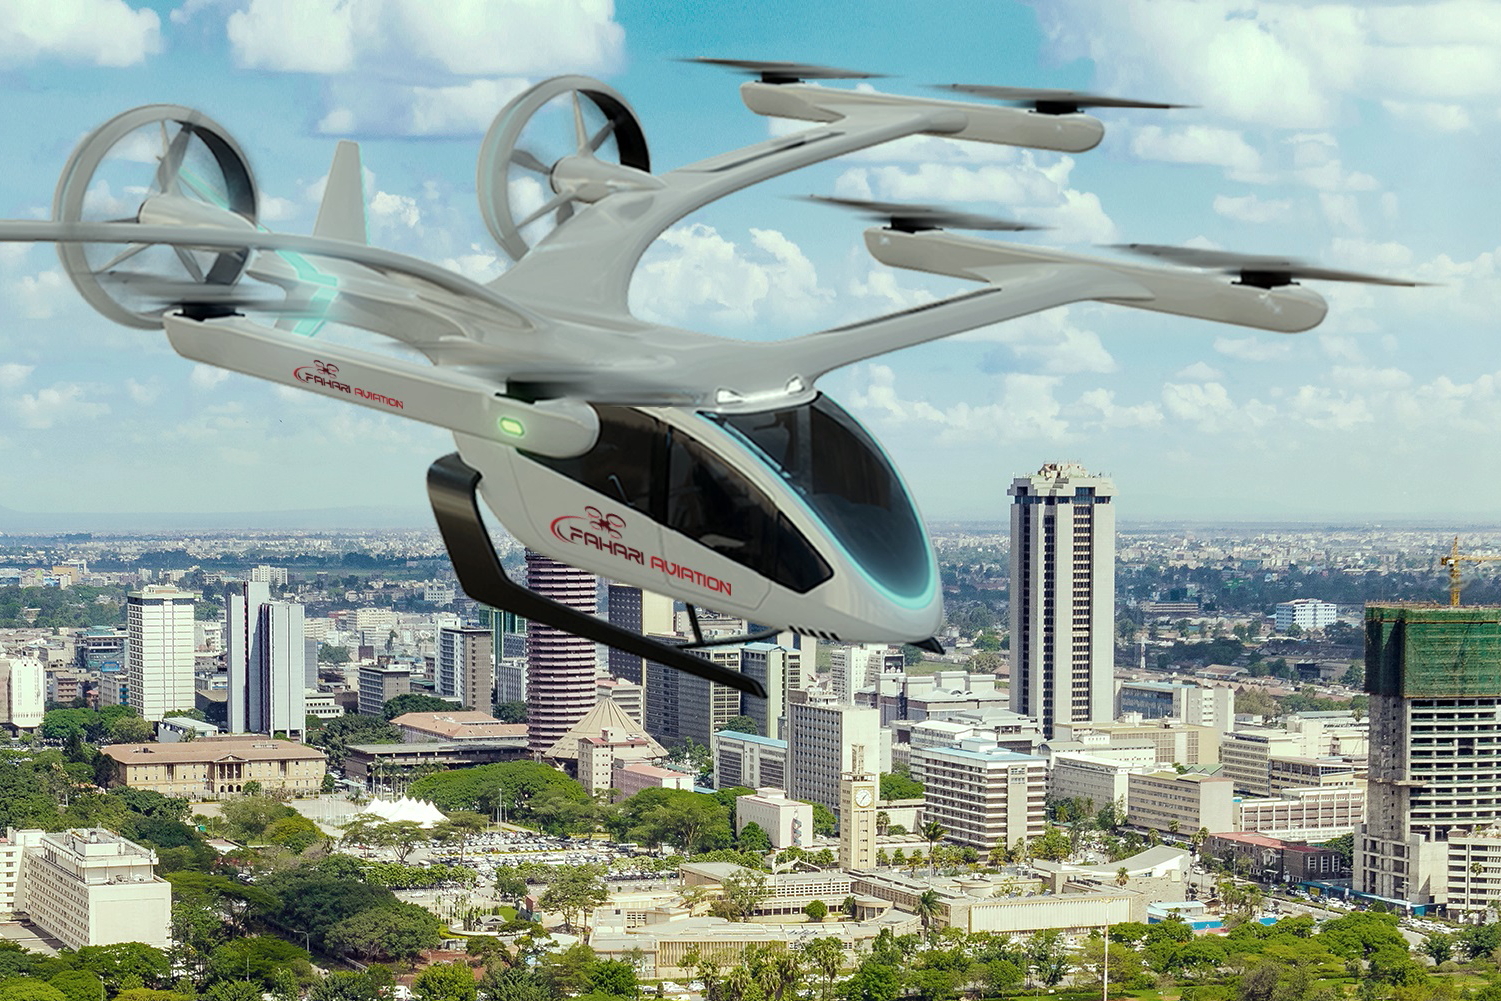 Eve Urban Air Mobility Solutions estimates that using UAM from the airport to downtown, eVTOL aircraft could reduce conventional road trips by up to 90% turning an hour and a half ride into a 6-minute flight. Click to enlarge.